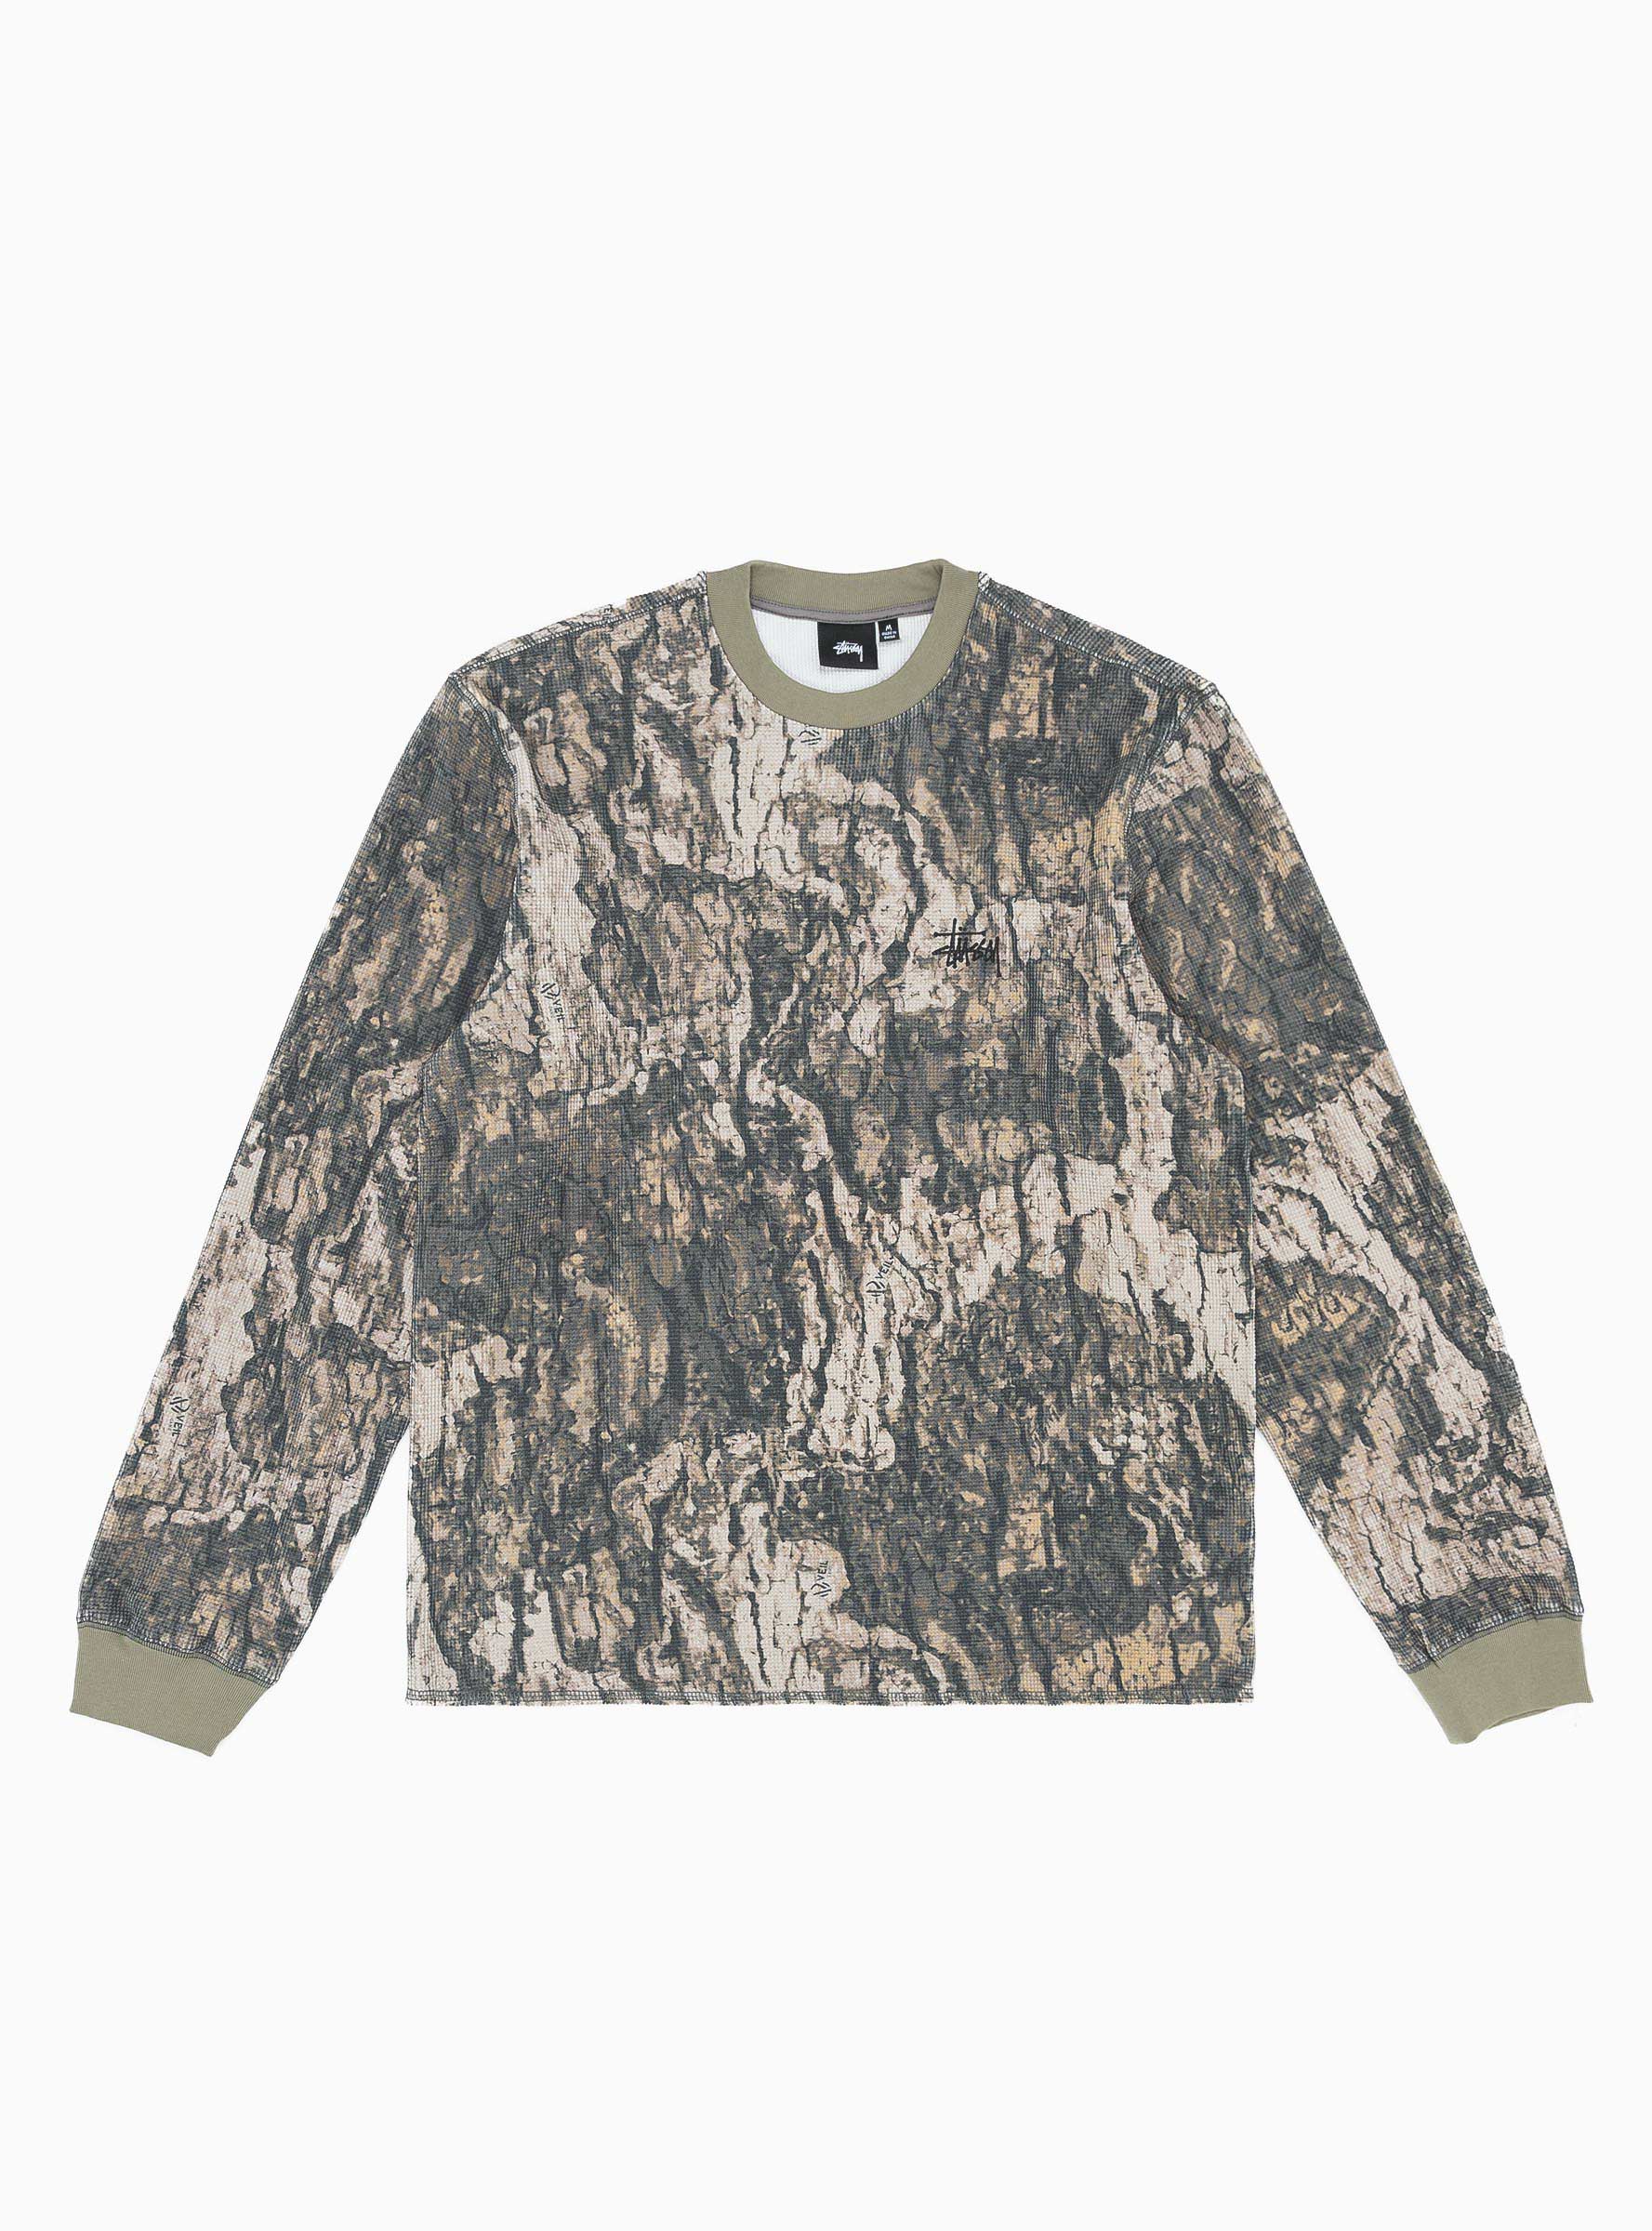 Basic Stock Thermal Top Khaki Relic Camo by Stüssy | Couverture & The